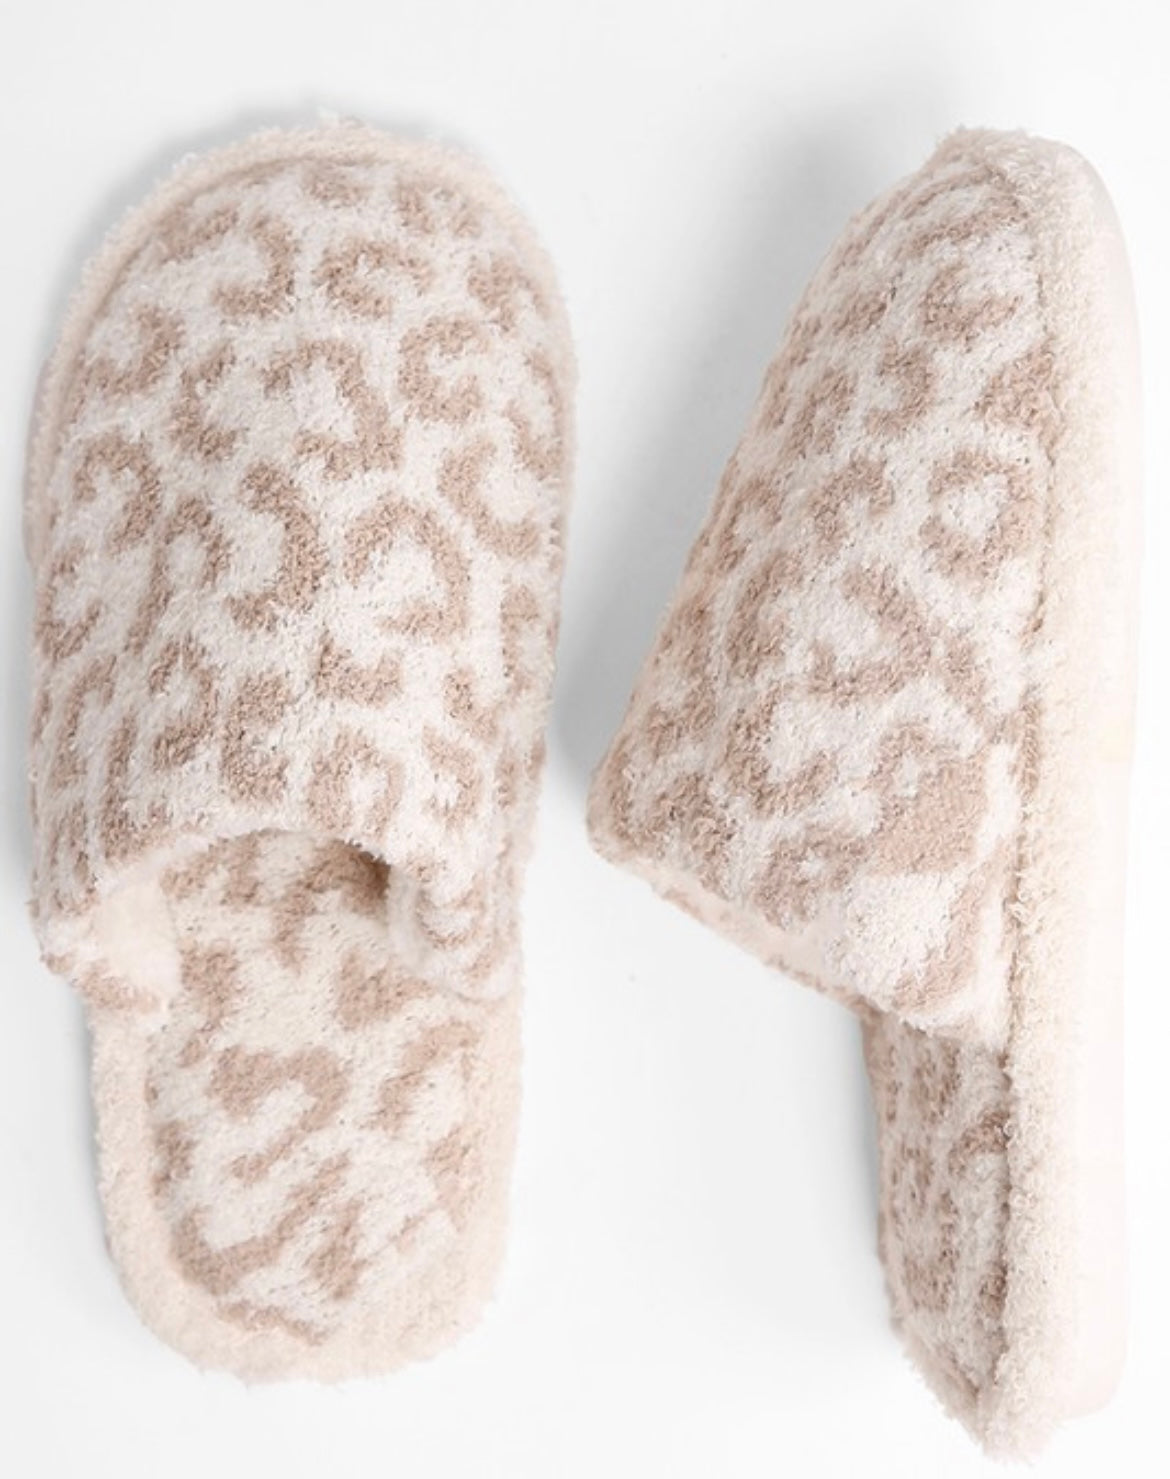 Cuddle Time Slippers-Beige